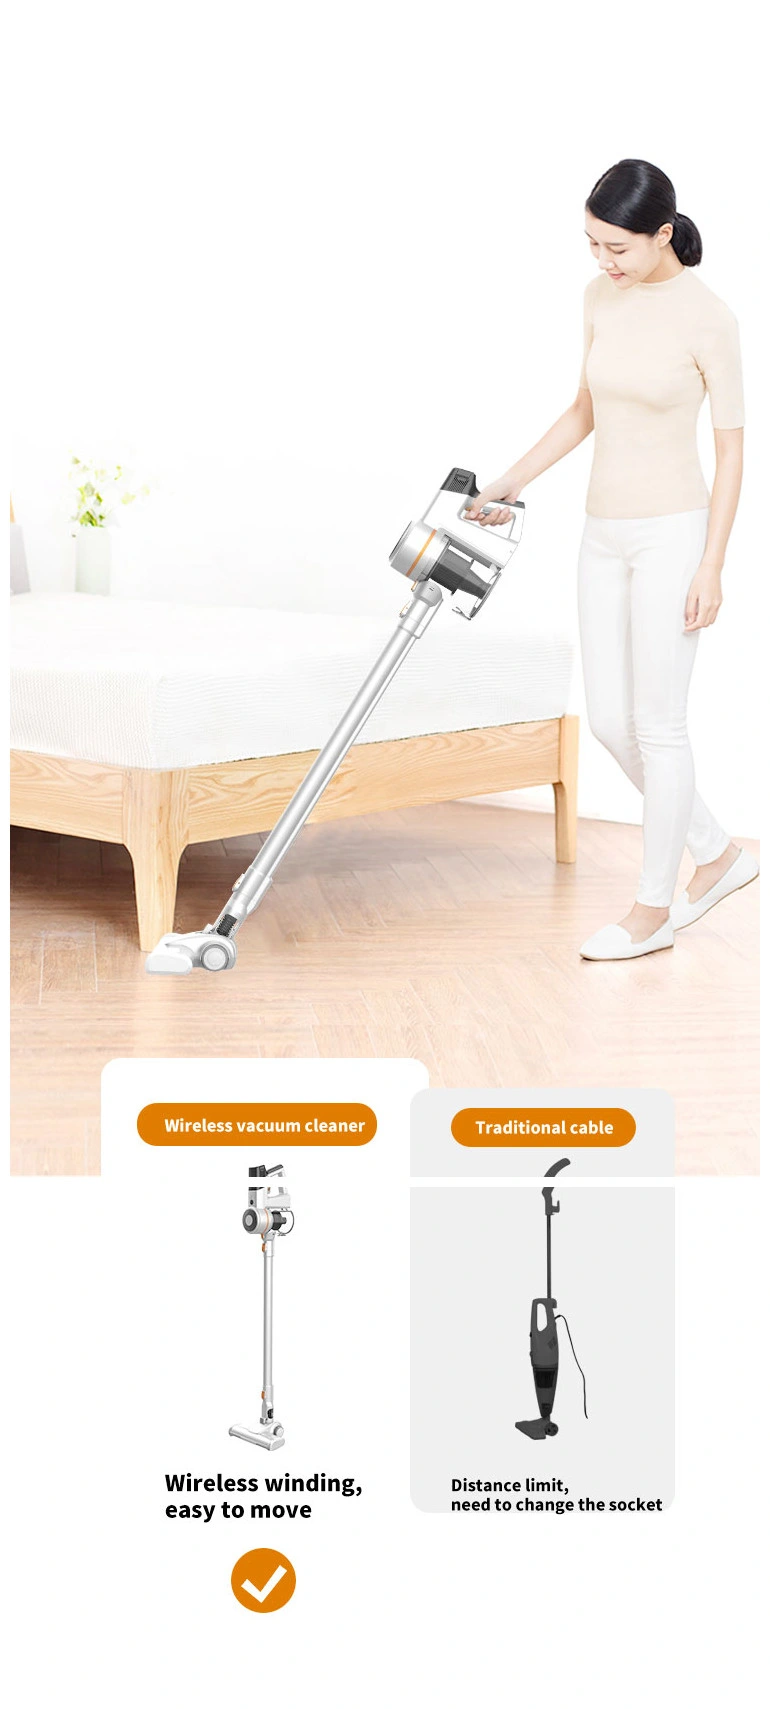 Gamana VC1905B Rechargeable 2 in 1 Cordless Handy Vacuum Cleaner